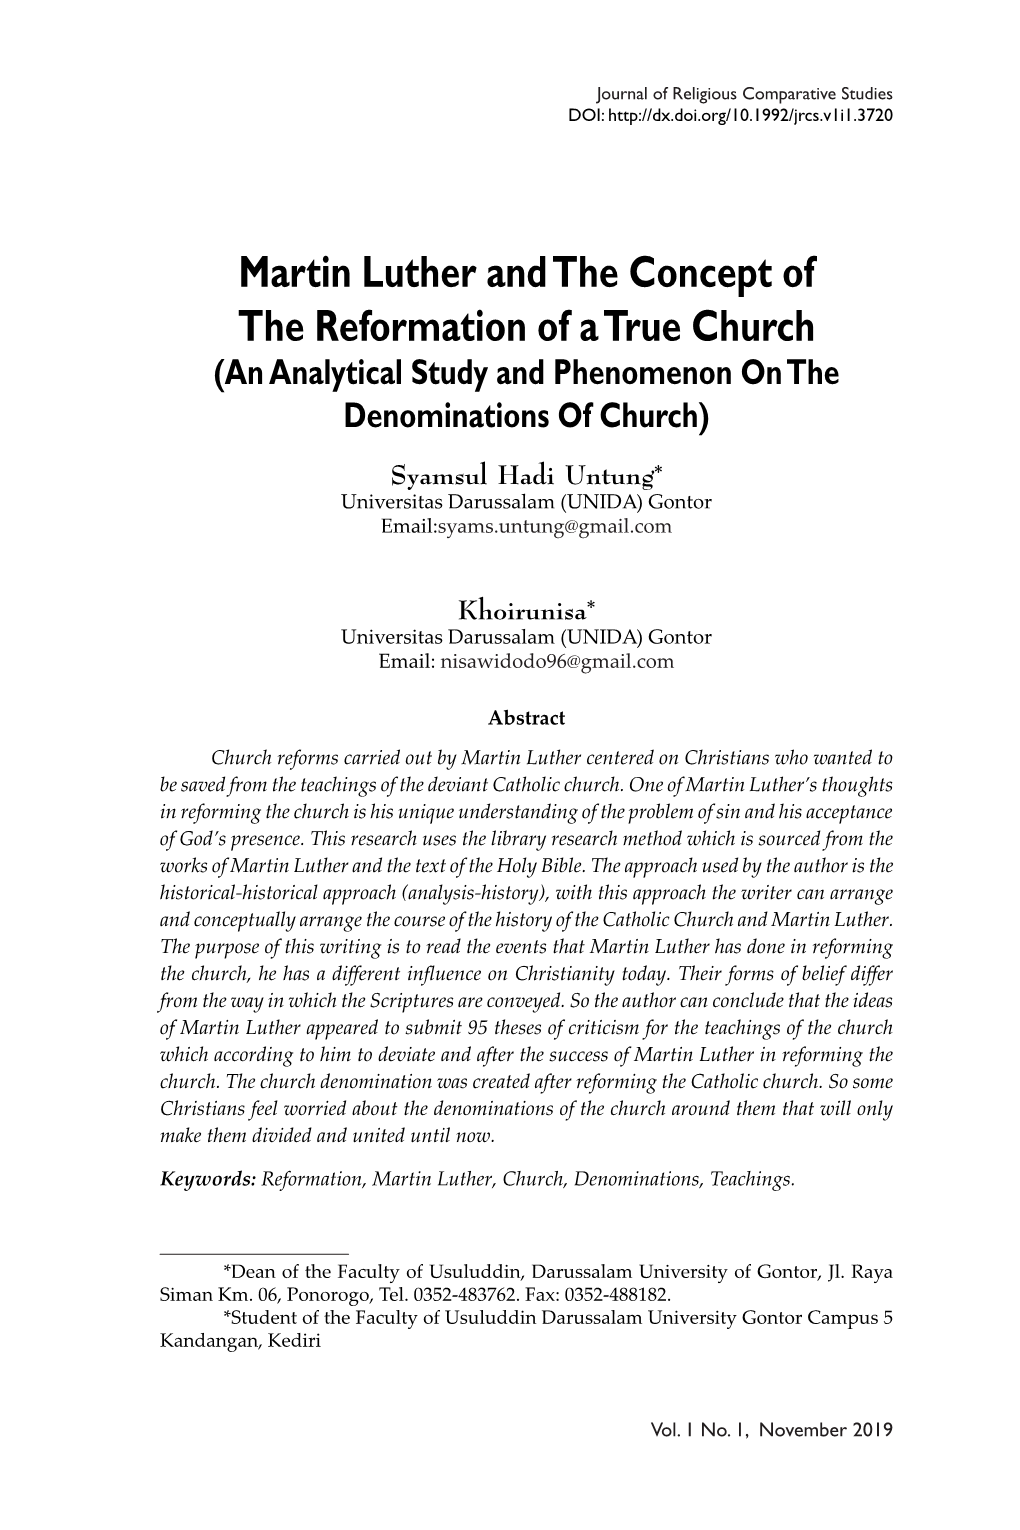 Martin Luther and the Concept of the Reformation of a True Church